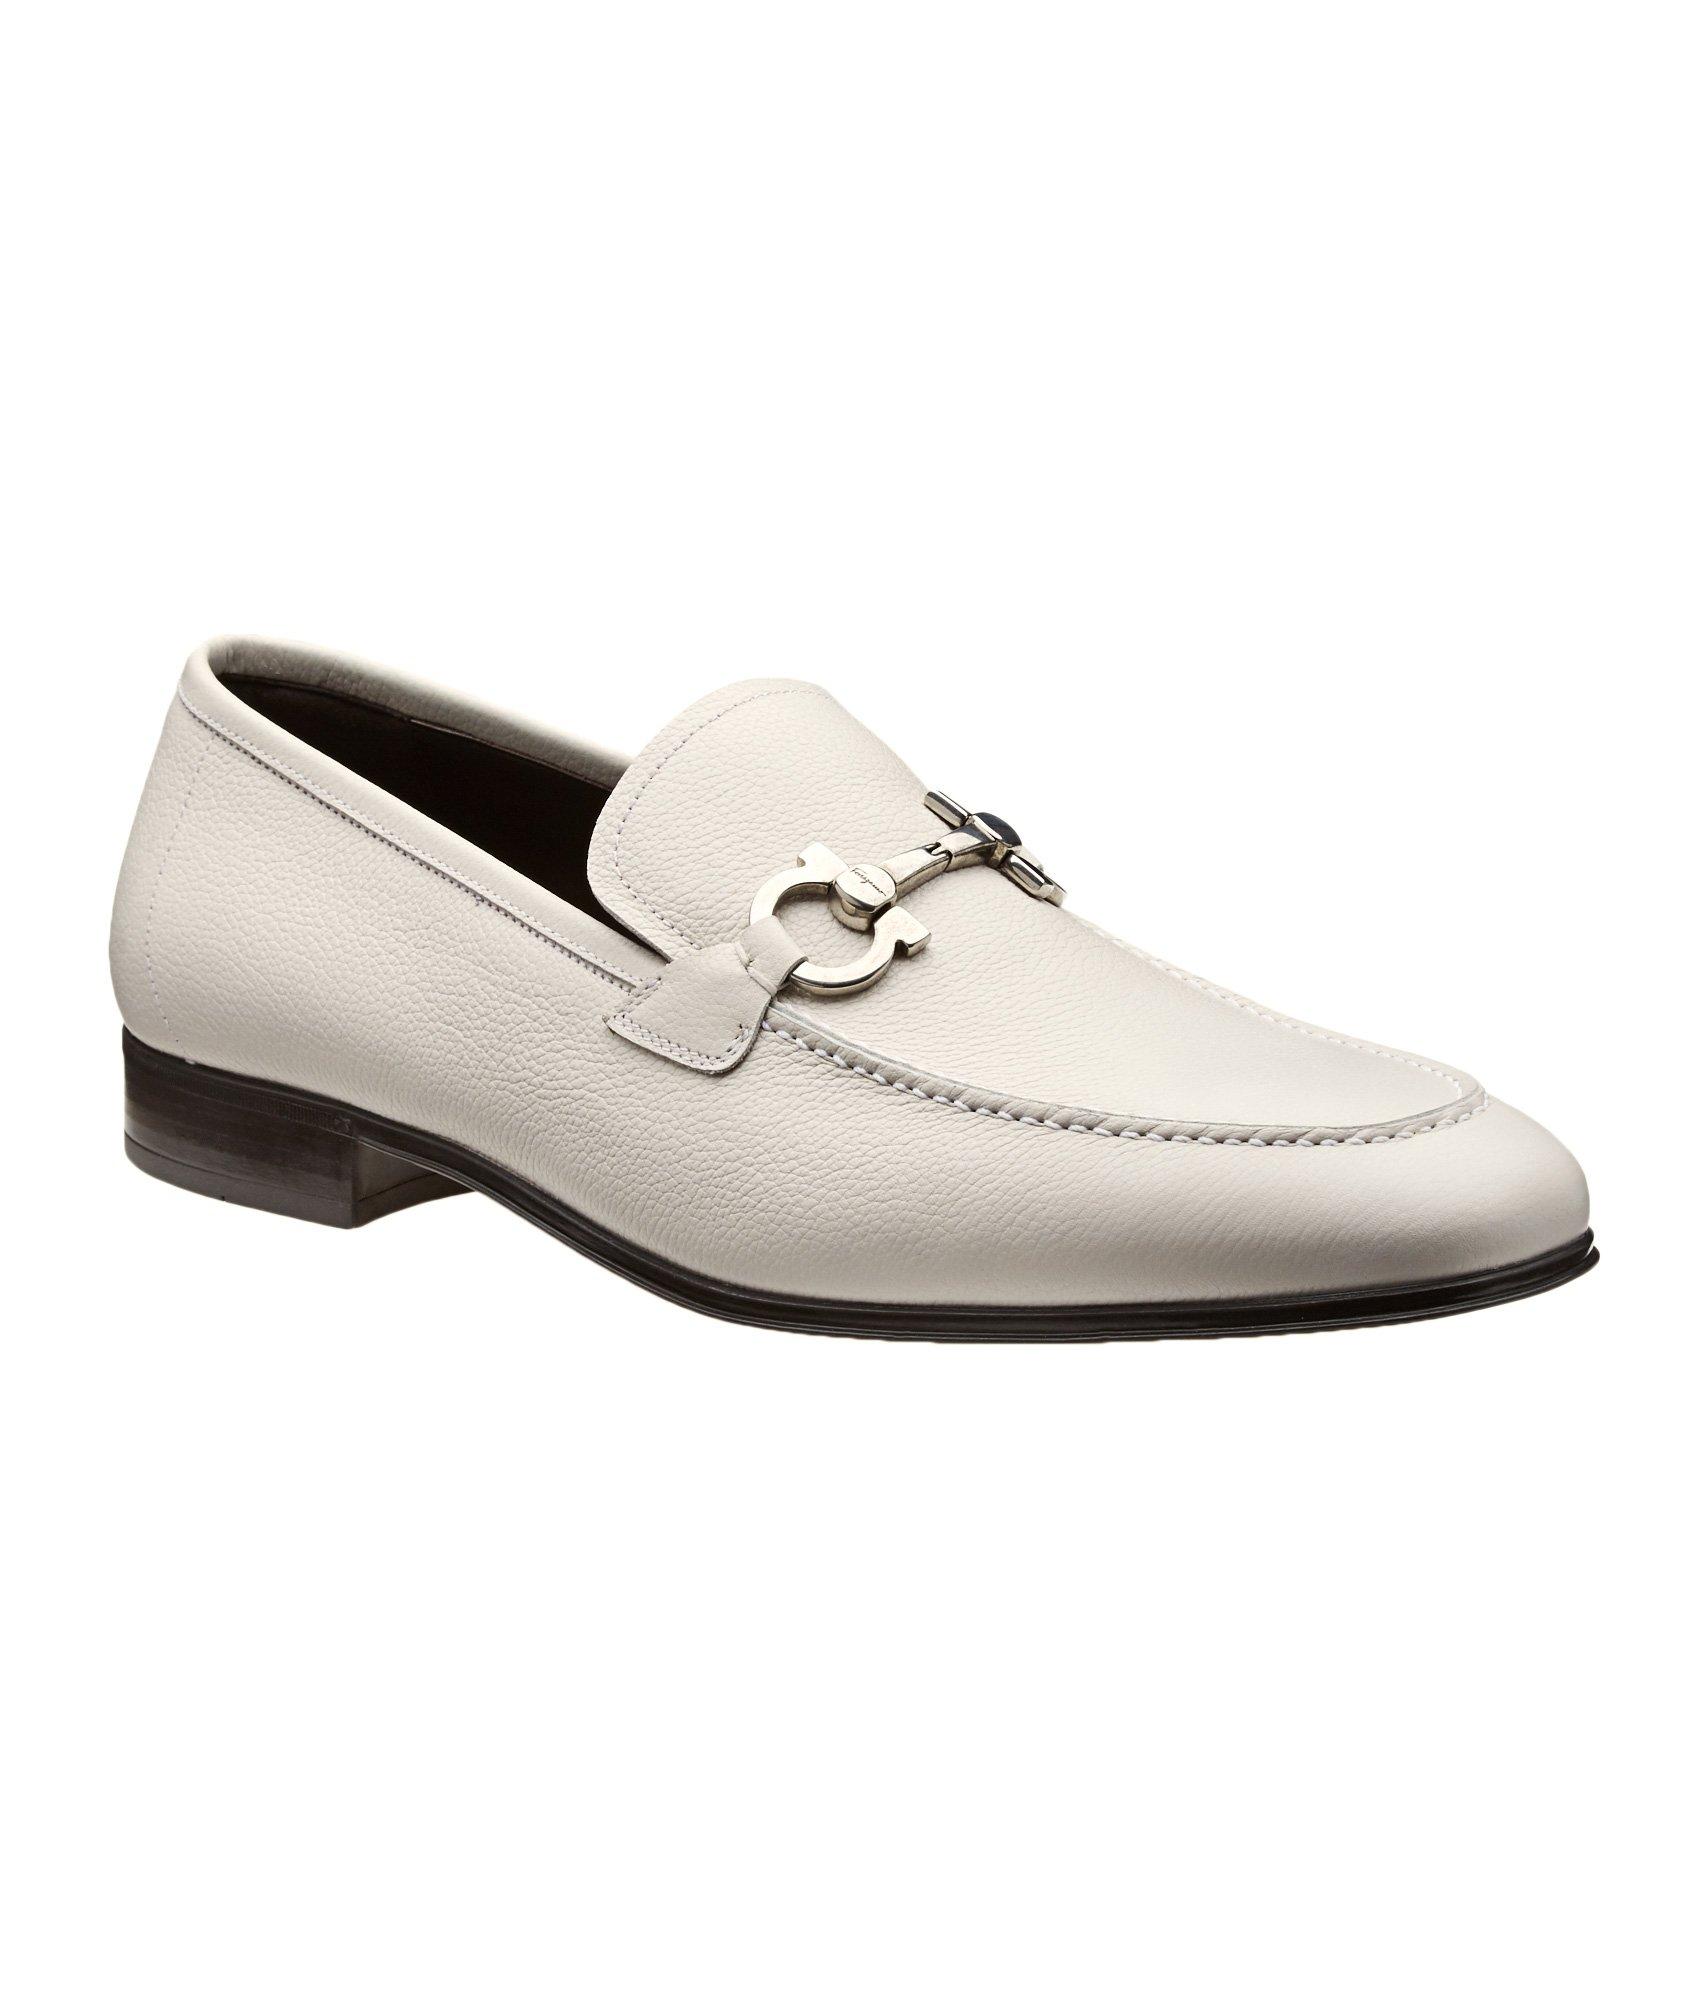 Flori 2 Pebbled Leather Loafers image 0